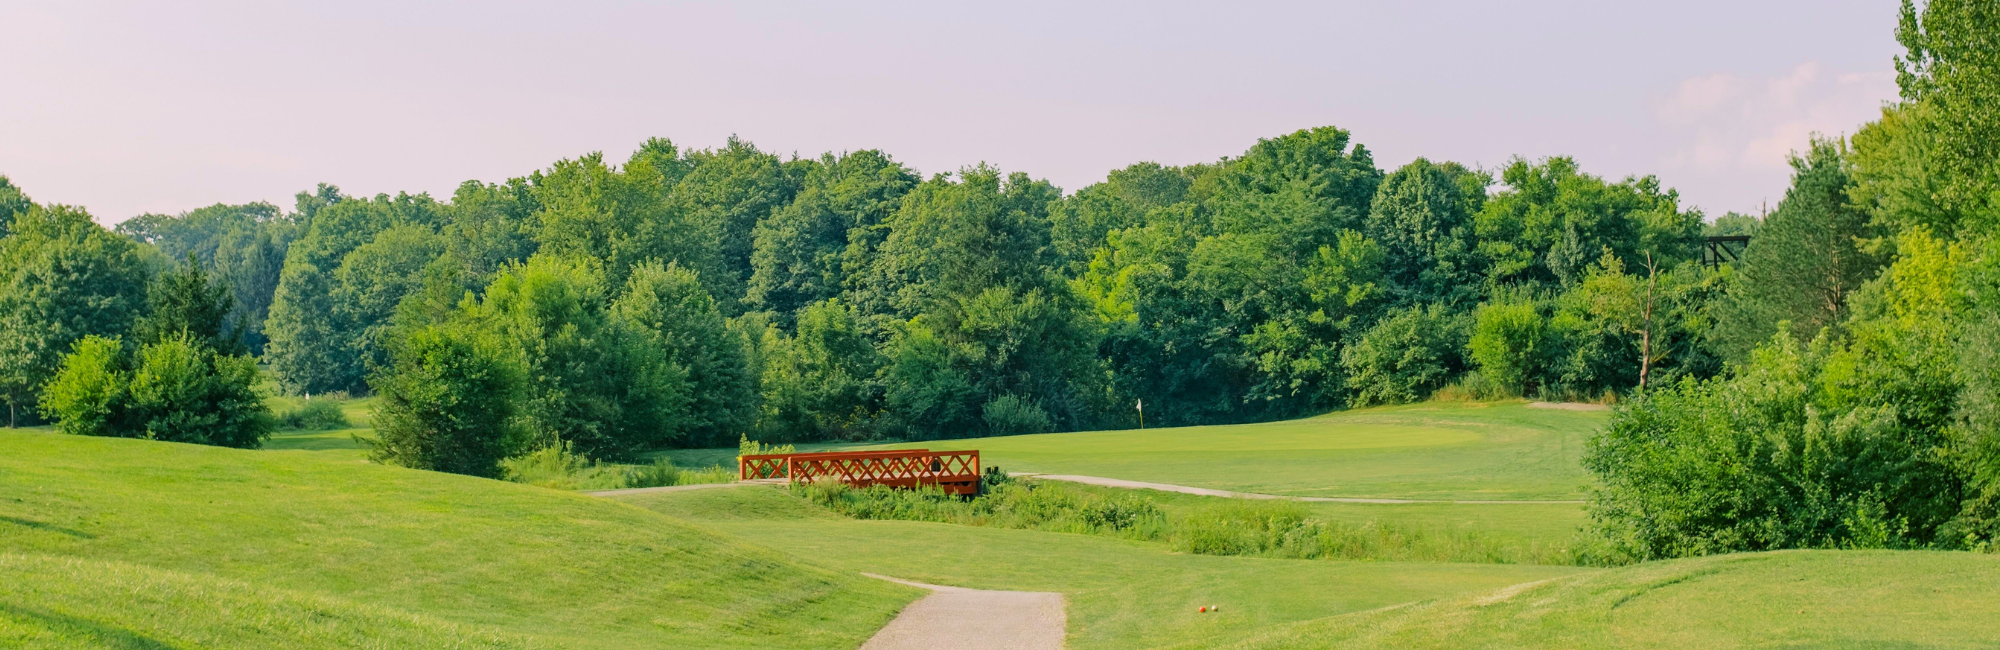 Whispering Hills Golf Course